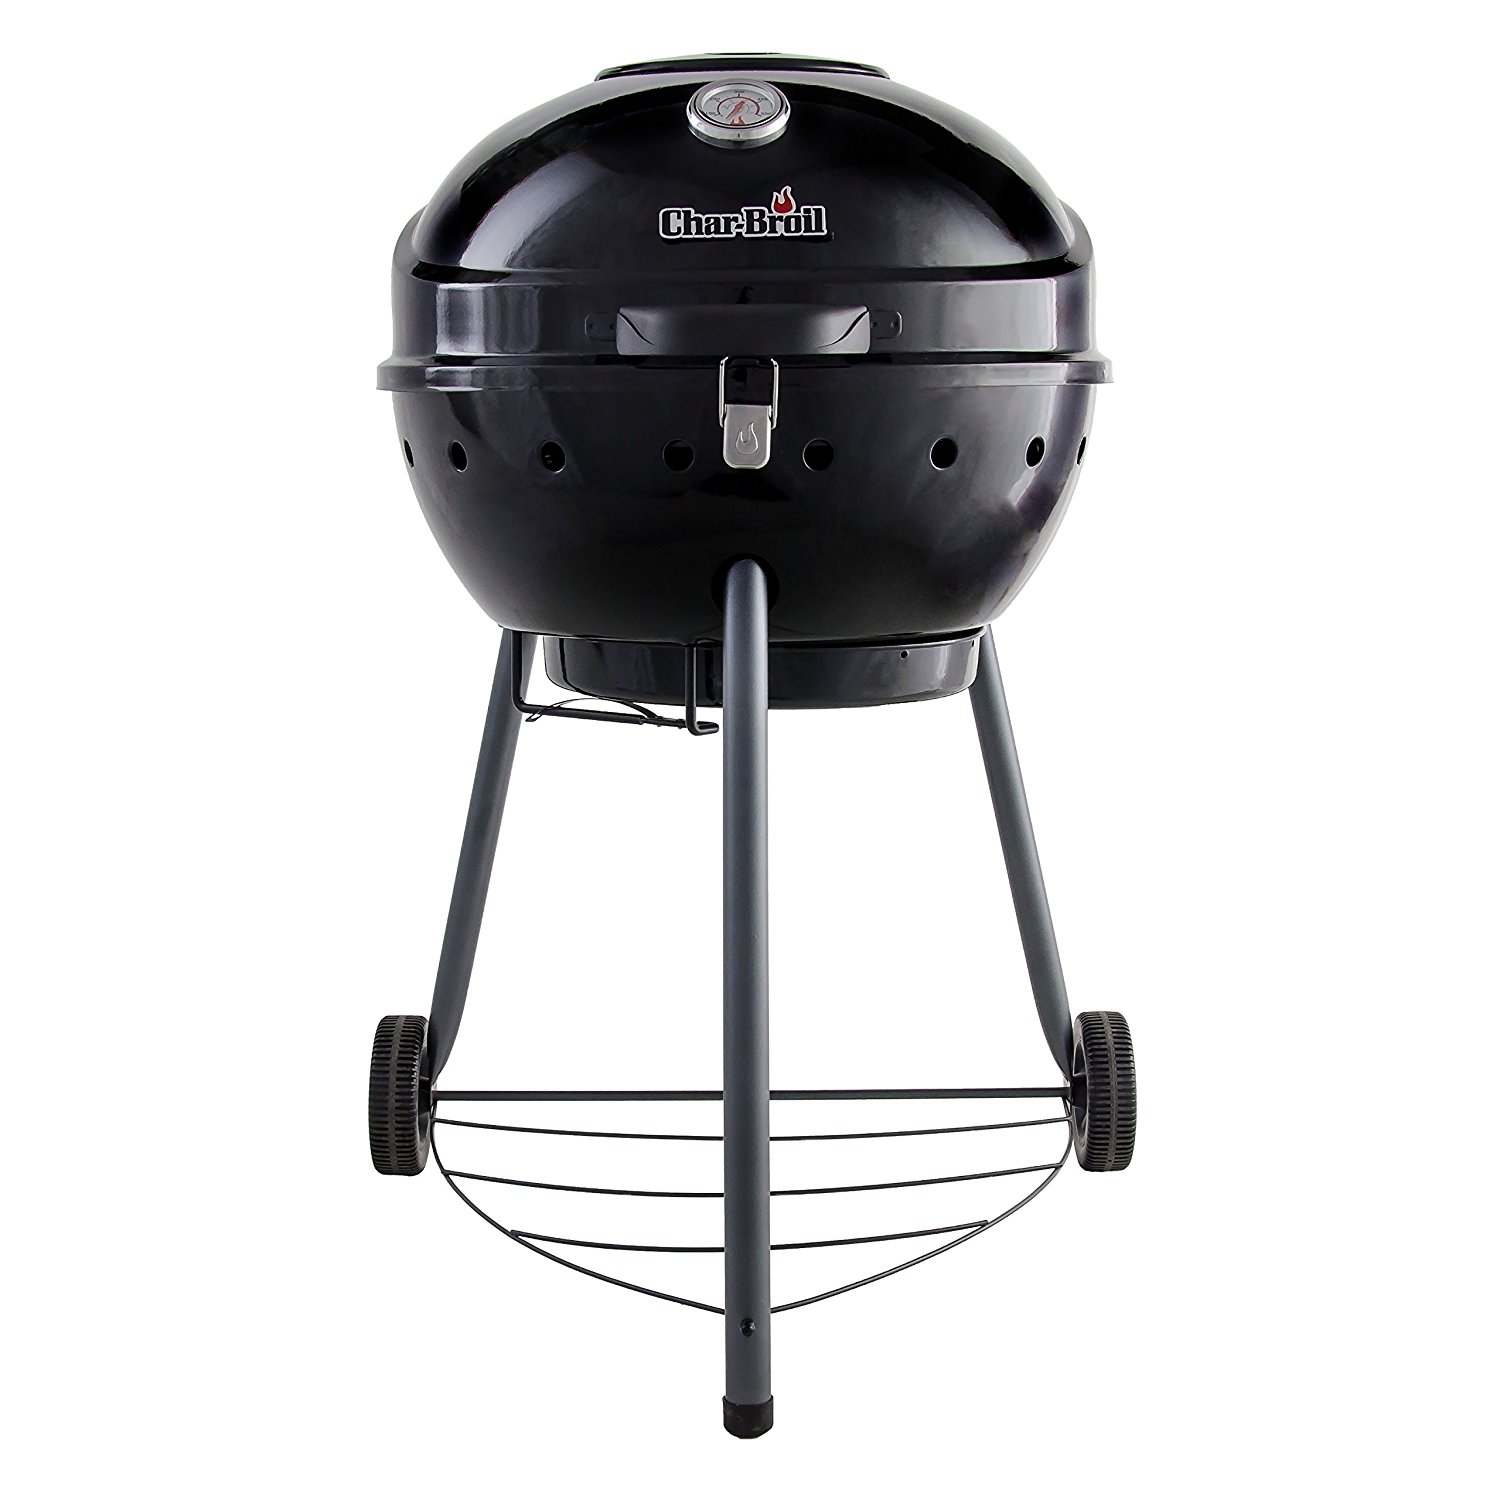 Top 13 Best Charcoal Grill Under 100